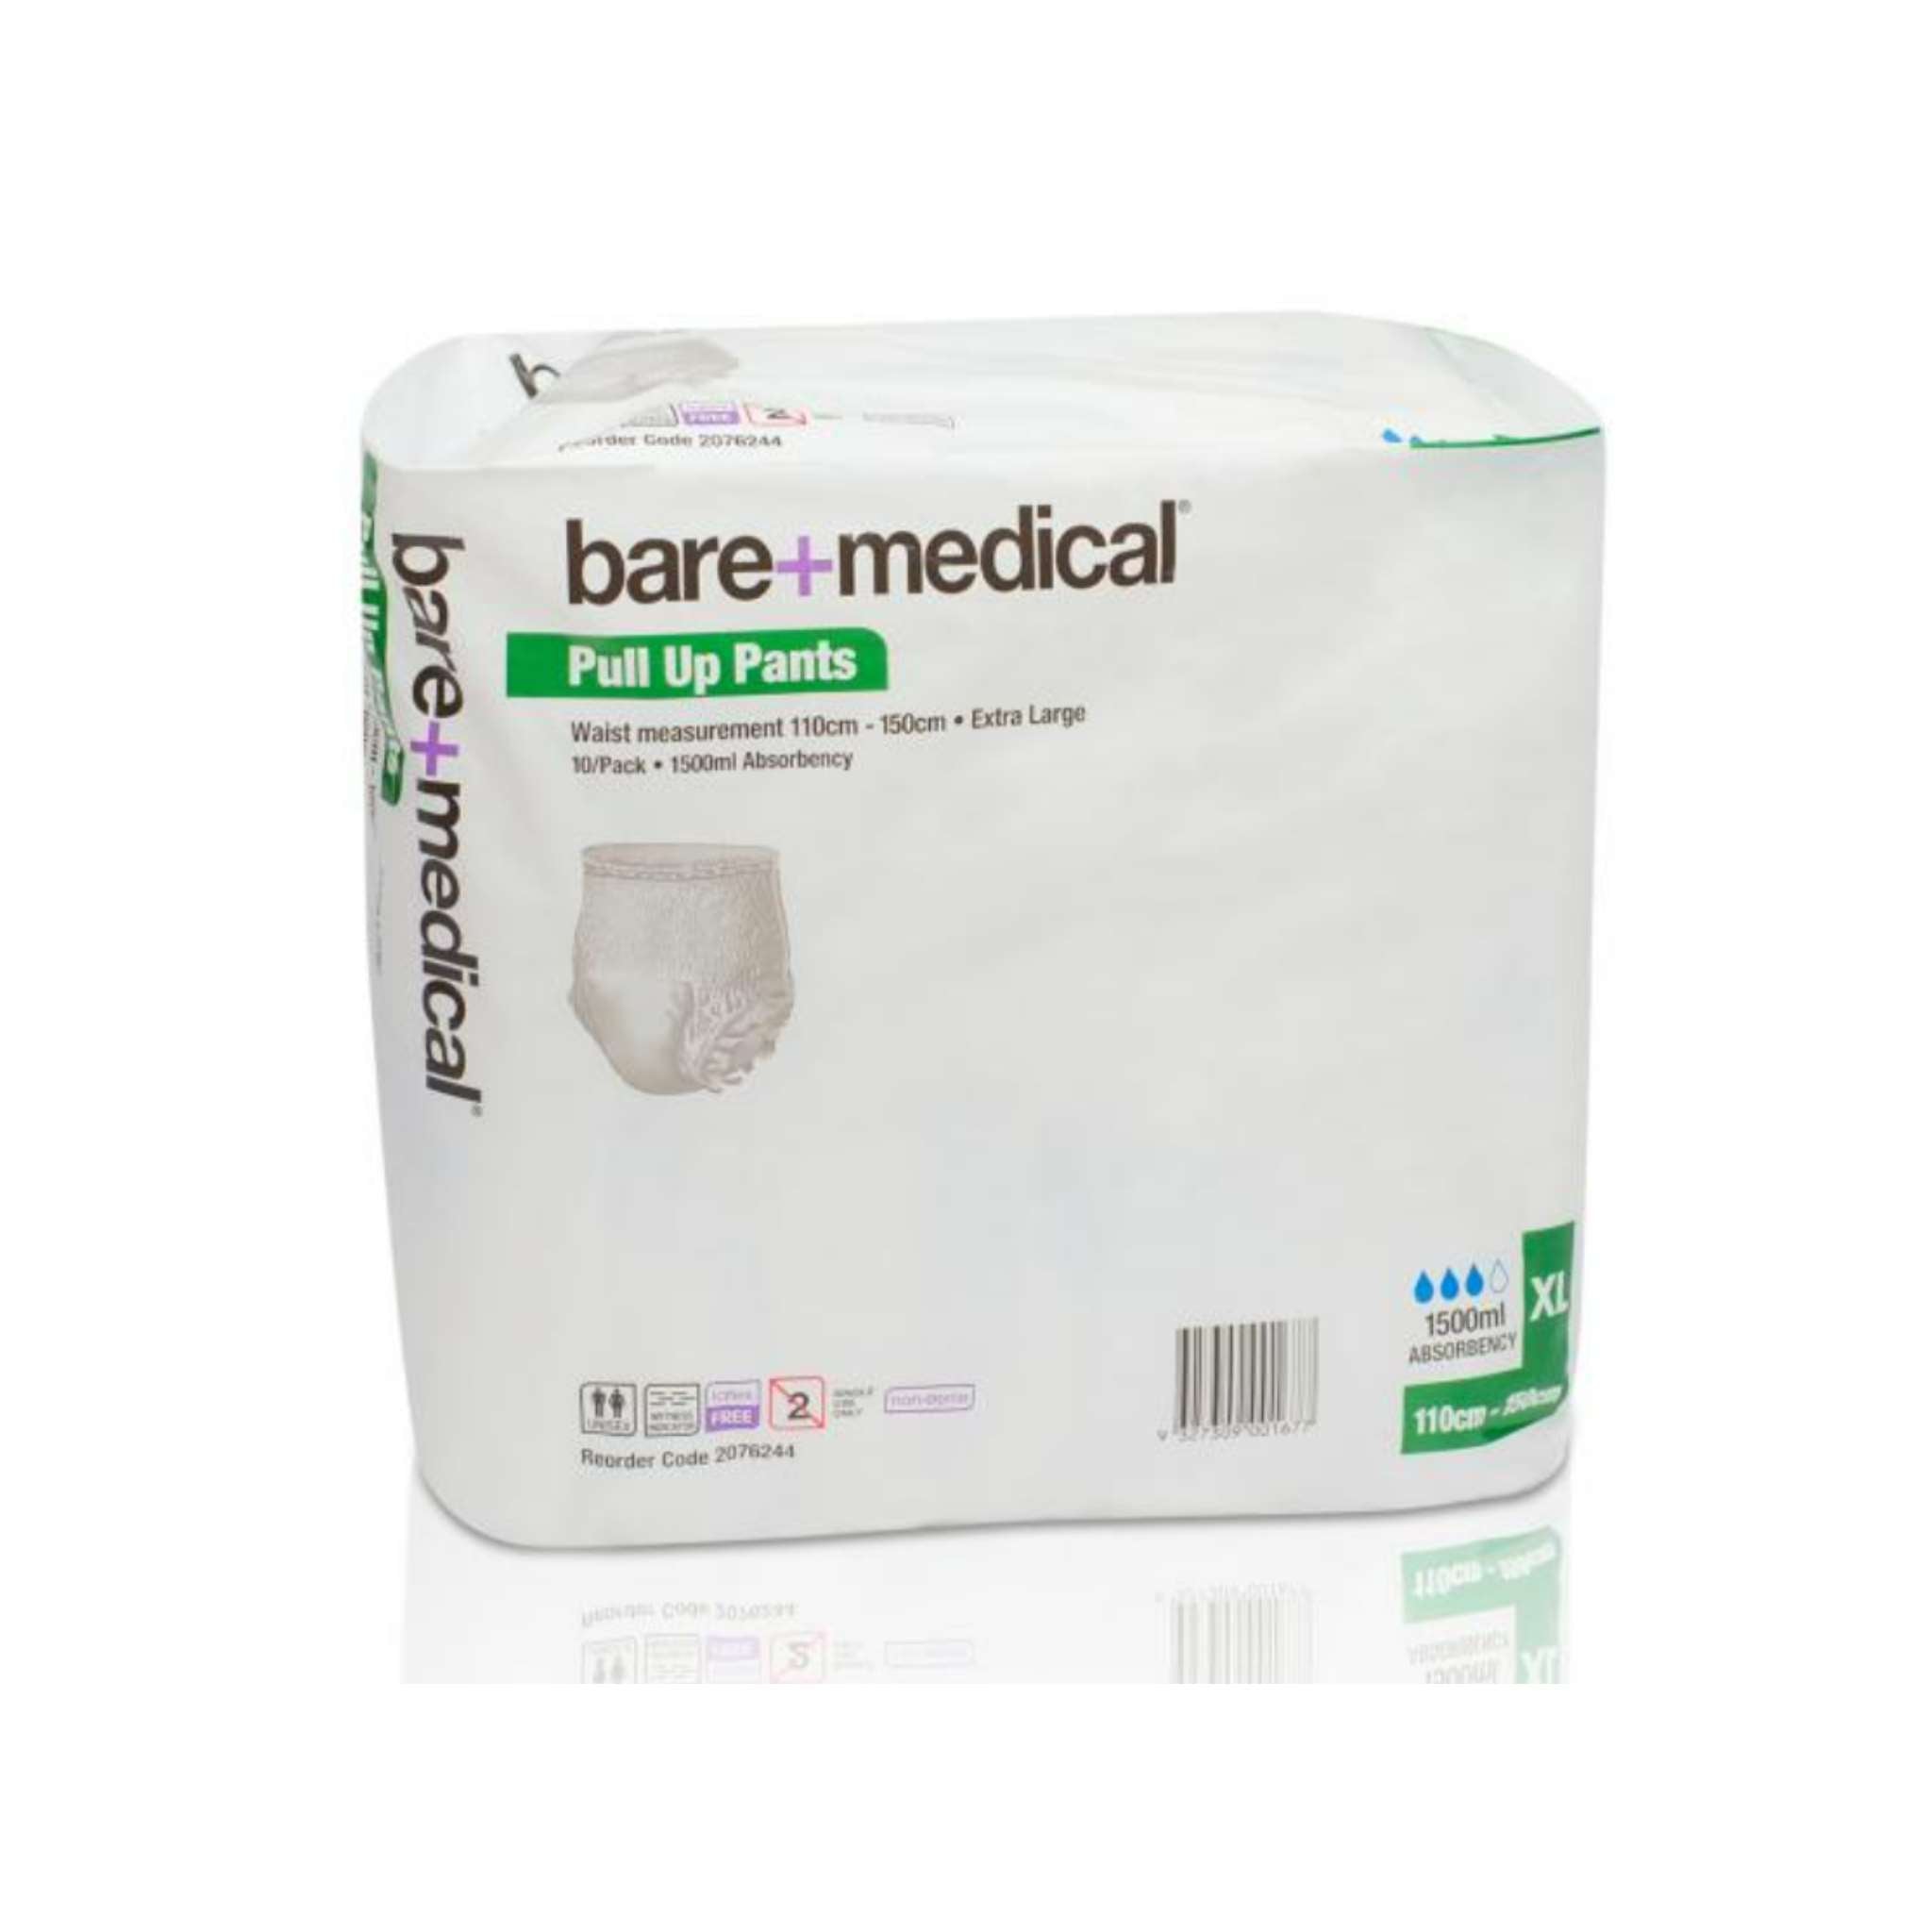 Bare Medical Pull-up Pant 1500ml - X-Large, Packet